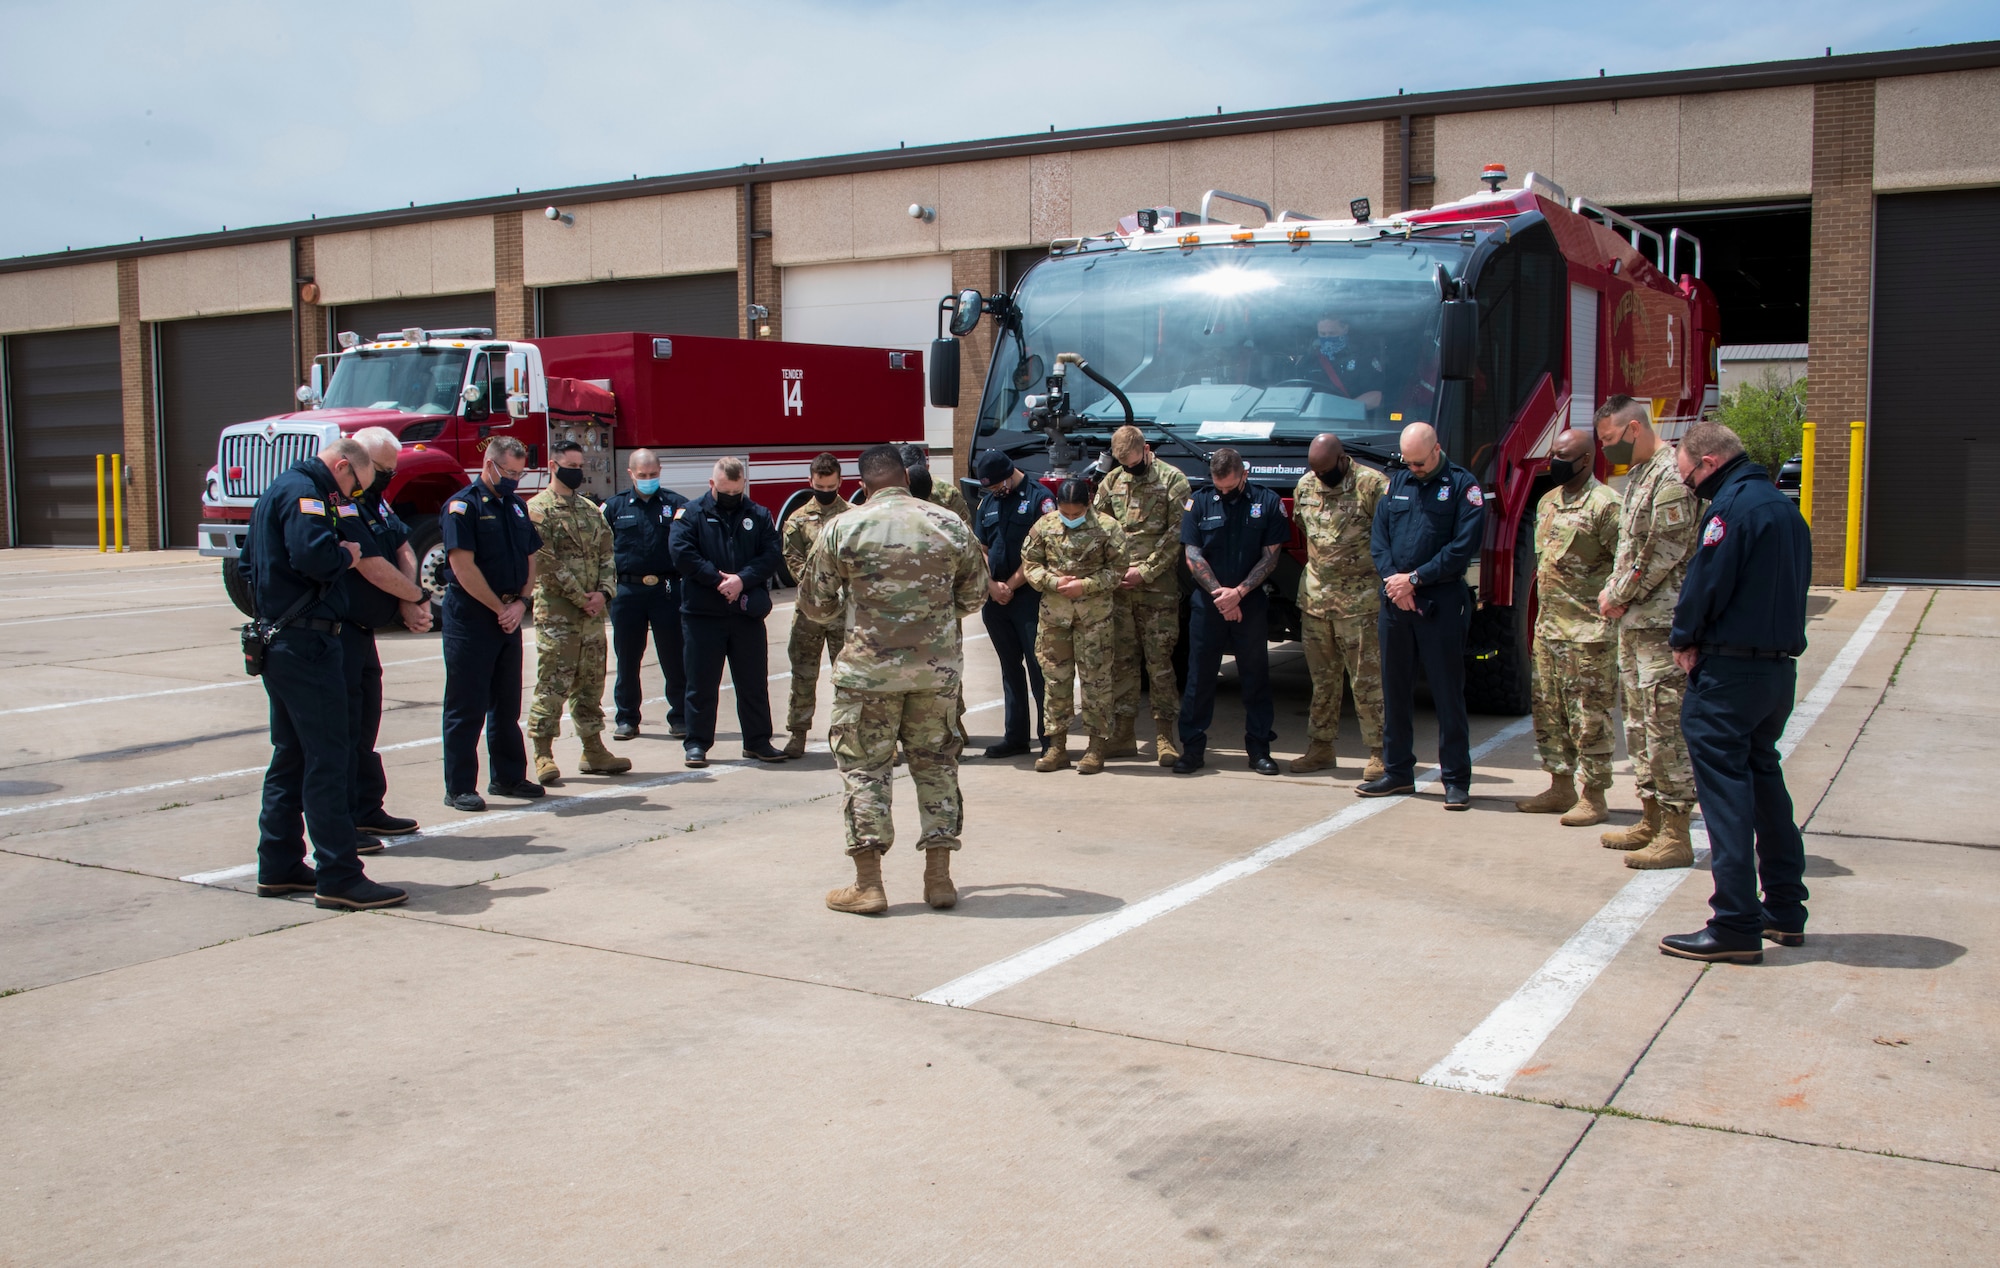 Capt. Ladron Thomas, 97th Air Mobility Wing chaplain, prays over Airmen, April 26, 2021, at Altus Air Force Base, Oklahoma. Following tradition, Thomas blessed the firefighters who would operate the truck, emphasizing the truck's ability to assist them while doing their job. (U.S. Air Force photo by Airman 1st Class Amanda Lovelace)